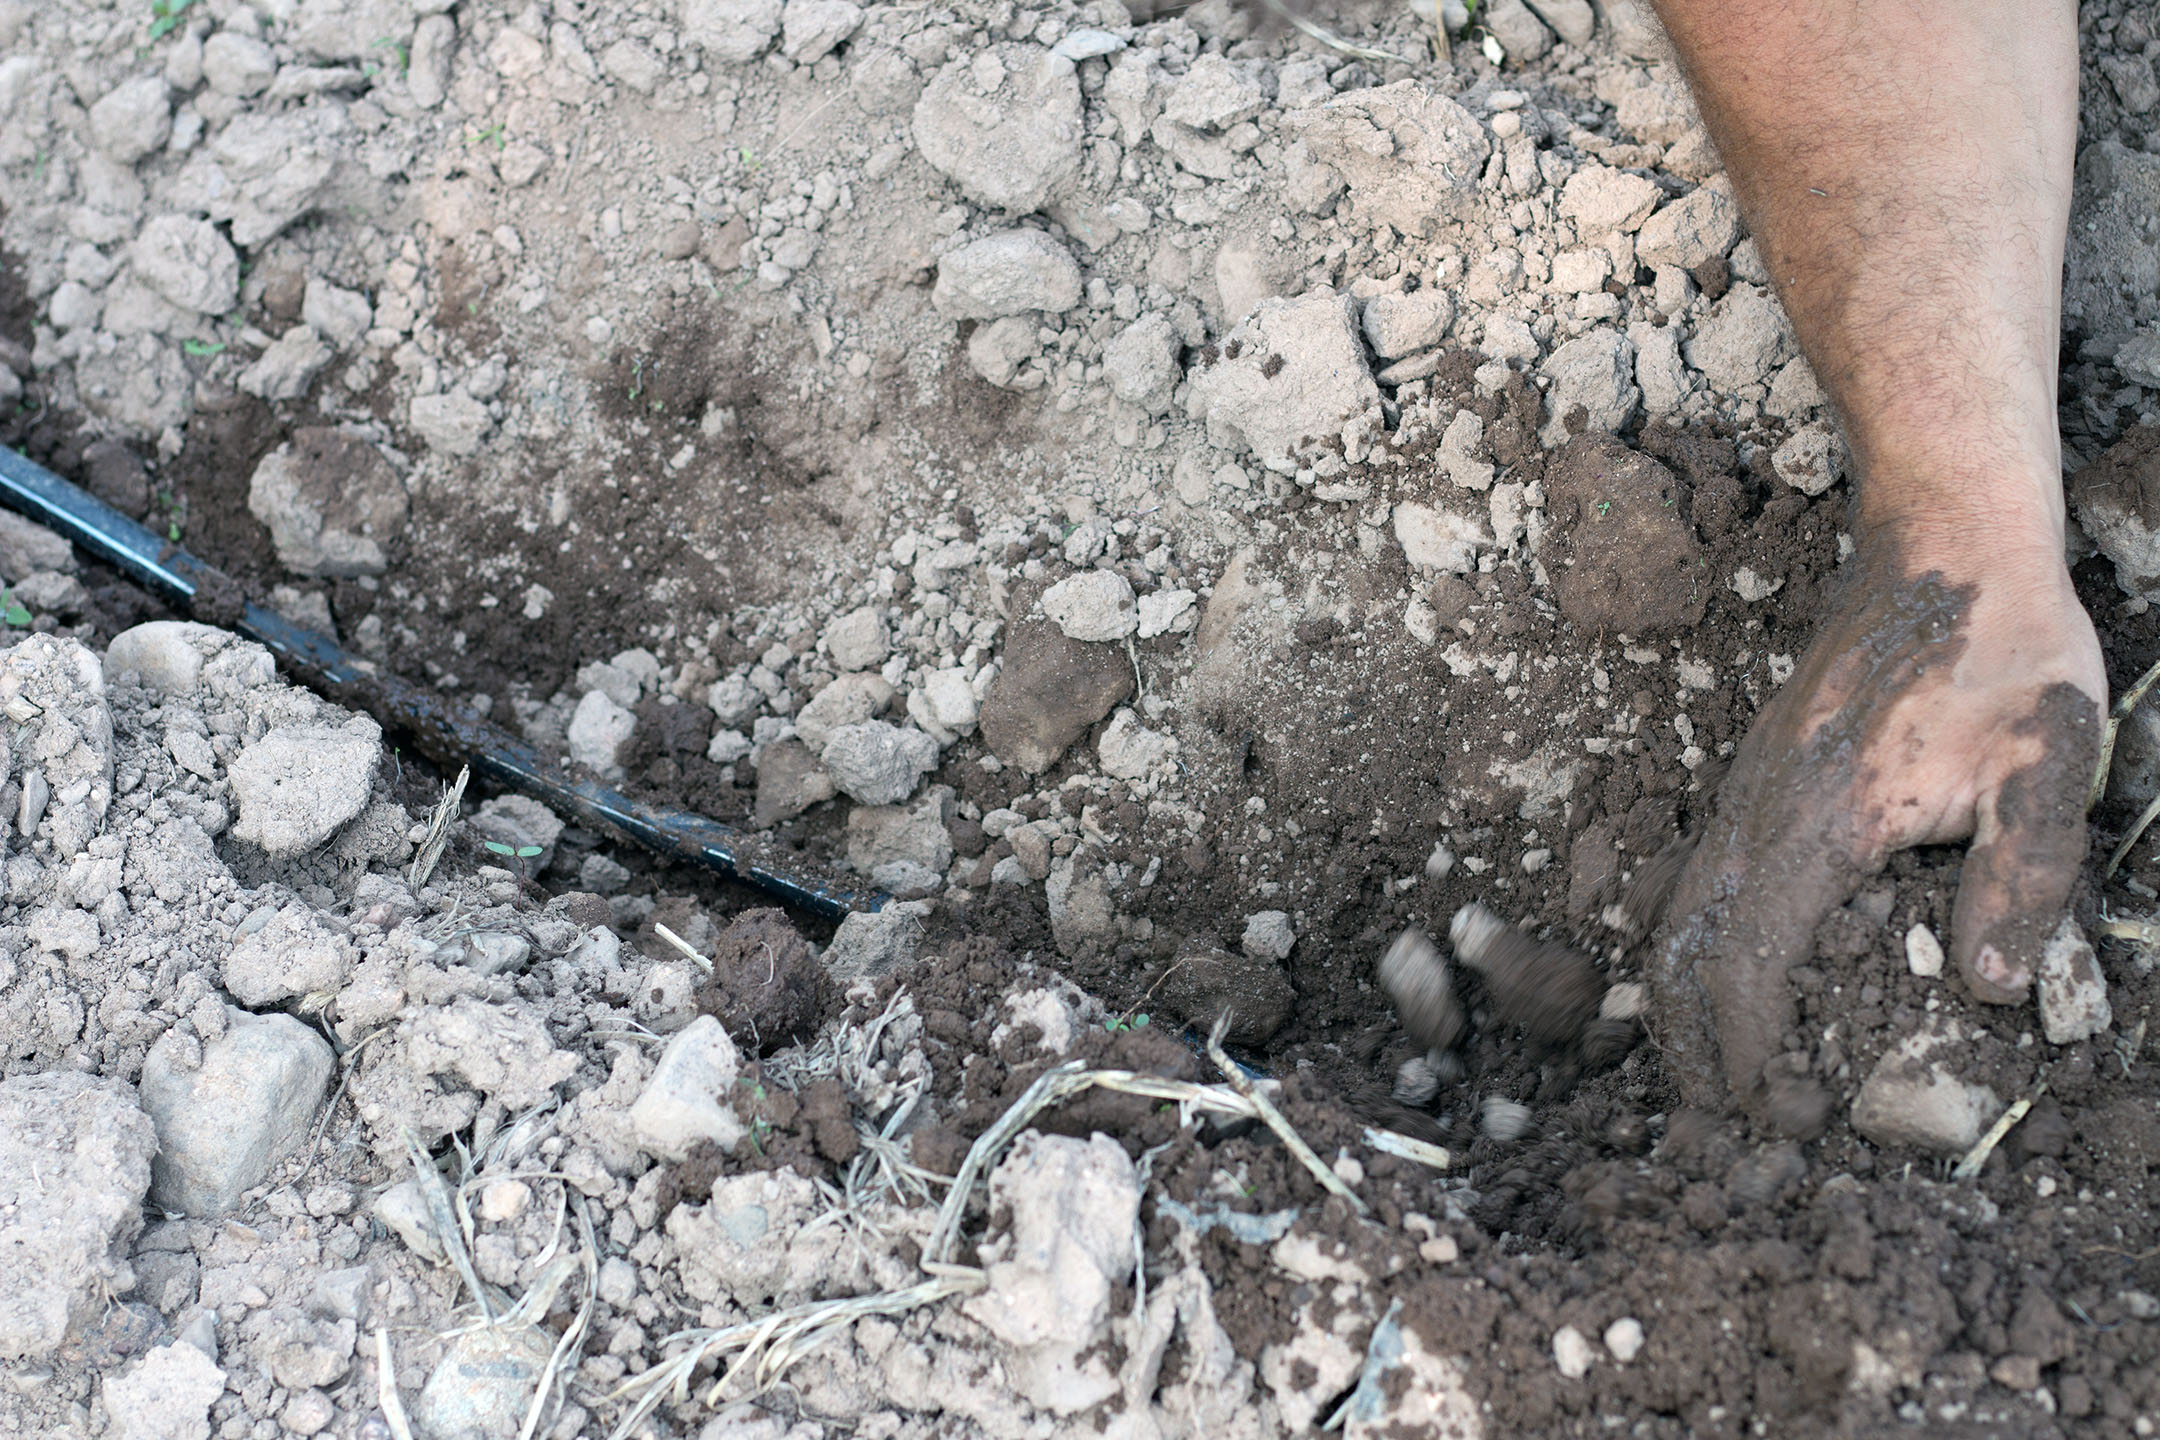 “That’s beautiful, and it doesn’t go anywhere,” comments William DellaCamera as he digs down to show the soil moisture difference between soil from the surface and soil that’s around a buried irrigation line on July 13th, 2018.